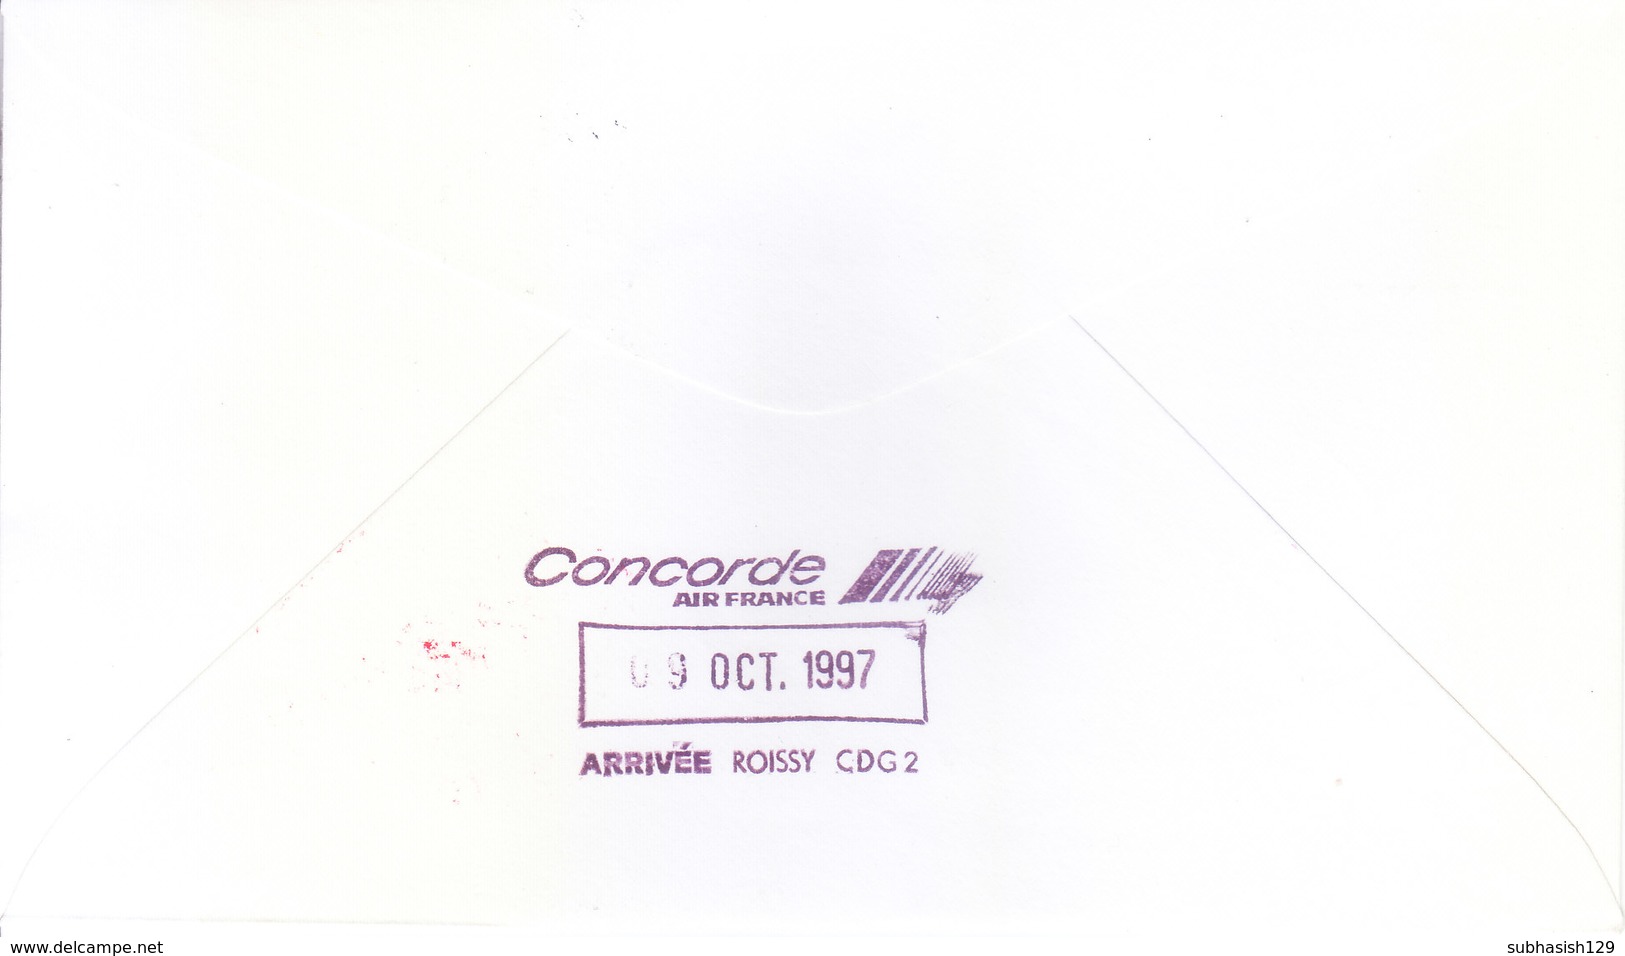 CHINA - FIRST FLIGHT COVER - 28-09-1997 - AIR FRANCE - CONCORDE - TIANJIN TO PARIS - Covers & Documents